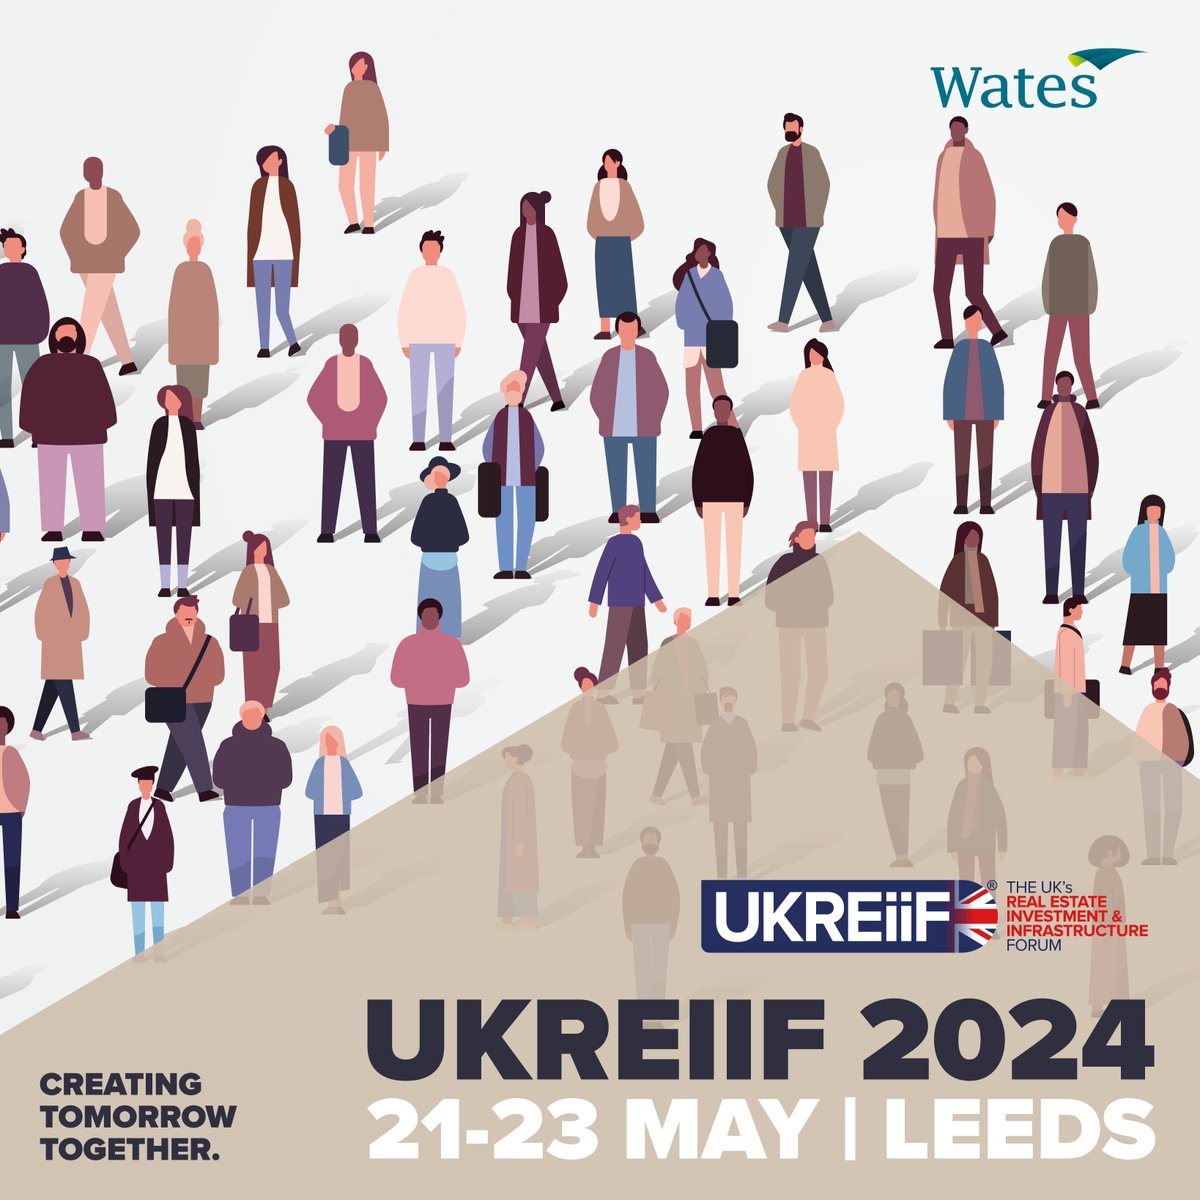 We’re thrilled to be returning to @UKREiiF in May. Join our Chief Executive, Executive board and senior leadership teams at Wates House, Tiltyard pavilion in the Royal Armouries, #Leeds during the three-day event. View our full programme: eu1.hubs.ly/H084Ztm0 #UKREiiF2024